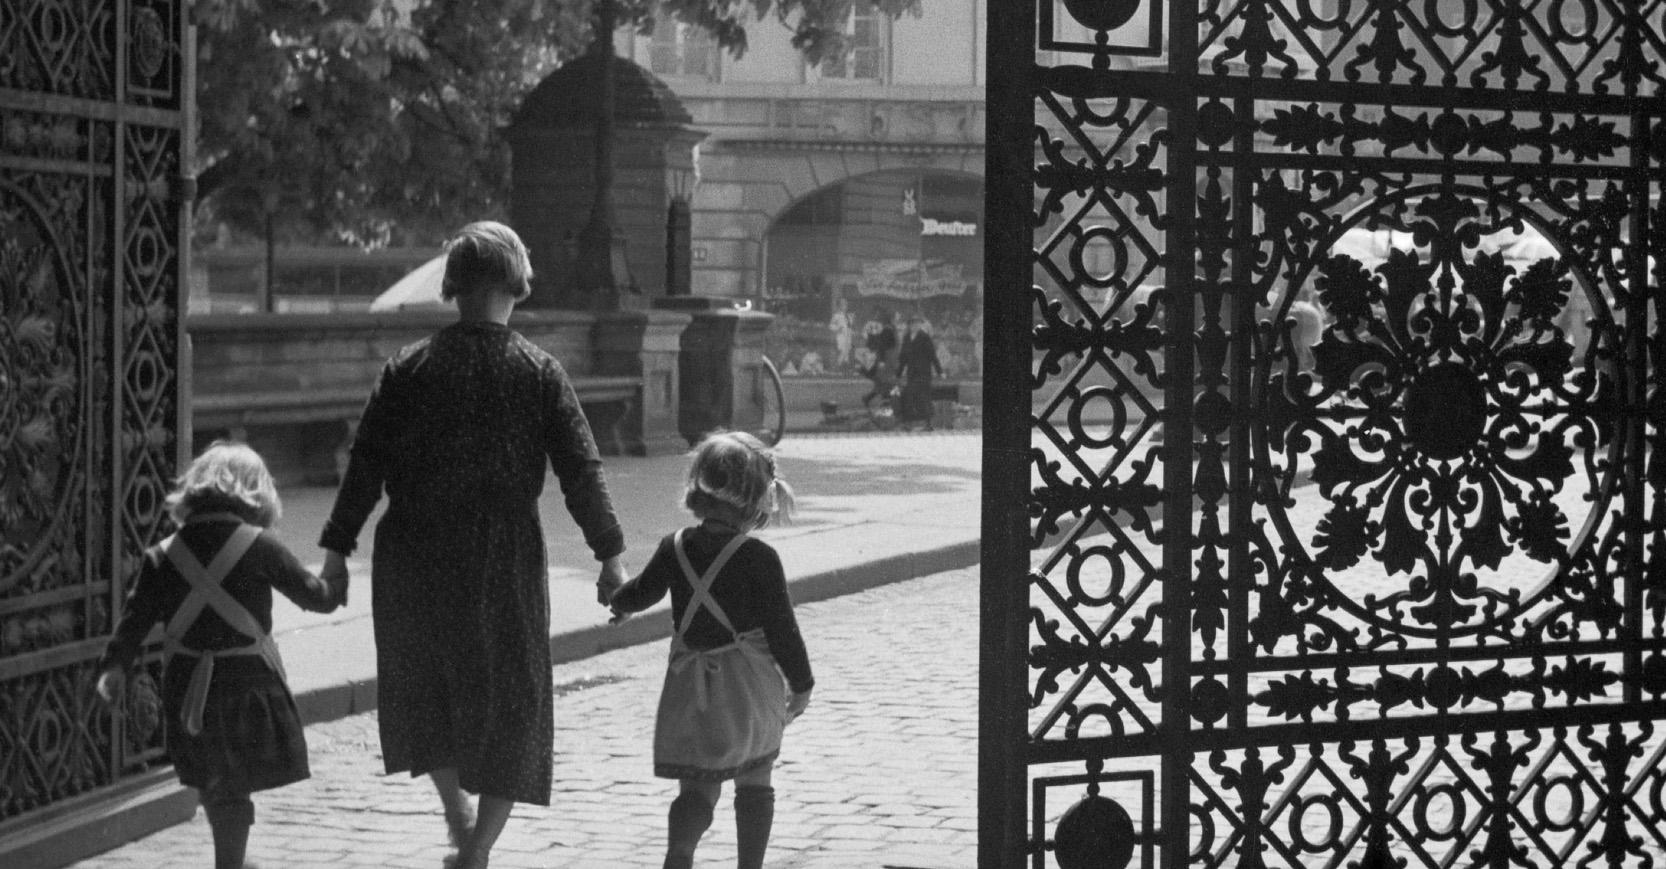 Entrance gate Darmstadt castle girls and woman, Germany 1938 Printed Later  - Photograph by Karl Heinrich Lämmel